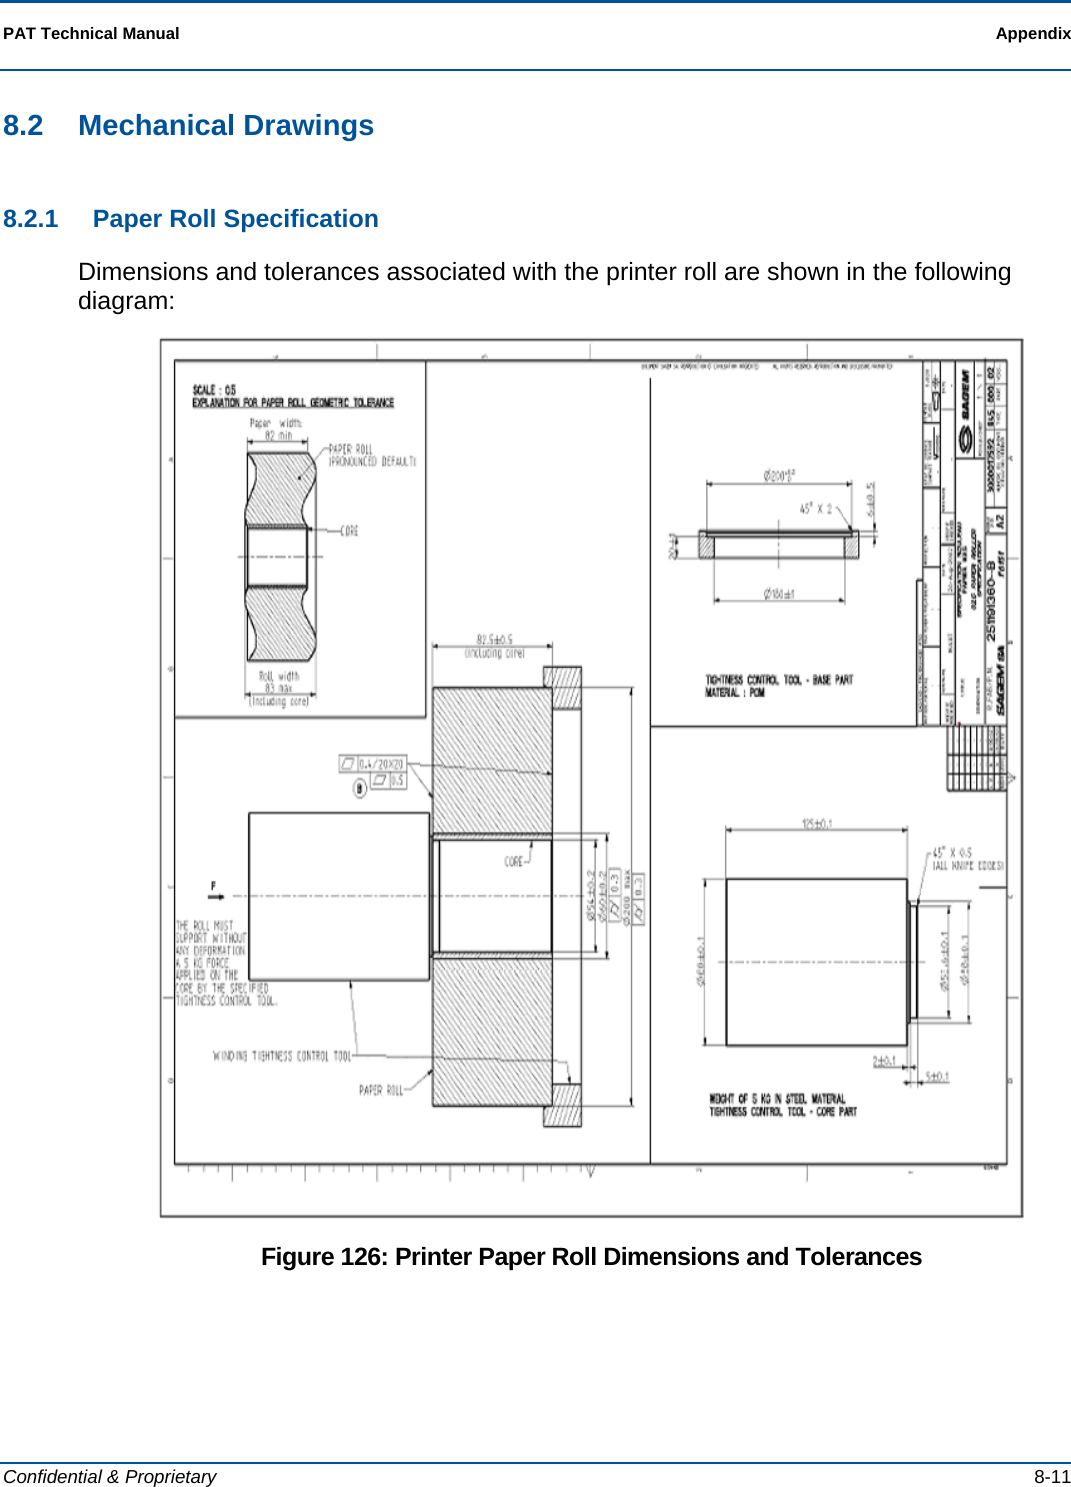  PAT Technical Manual    Appendix  Confidential &amp; Proprietary   8-11 8.2 Mechanical Drawings 8.2.1  Paper Roll Specification Dimensions and tolerances associated with the printer roll are shown in the following diagram:  Figure 126: Printer Paper Roll Dimensions and Tolerances 